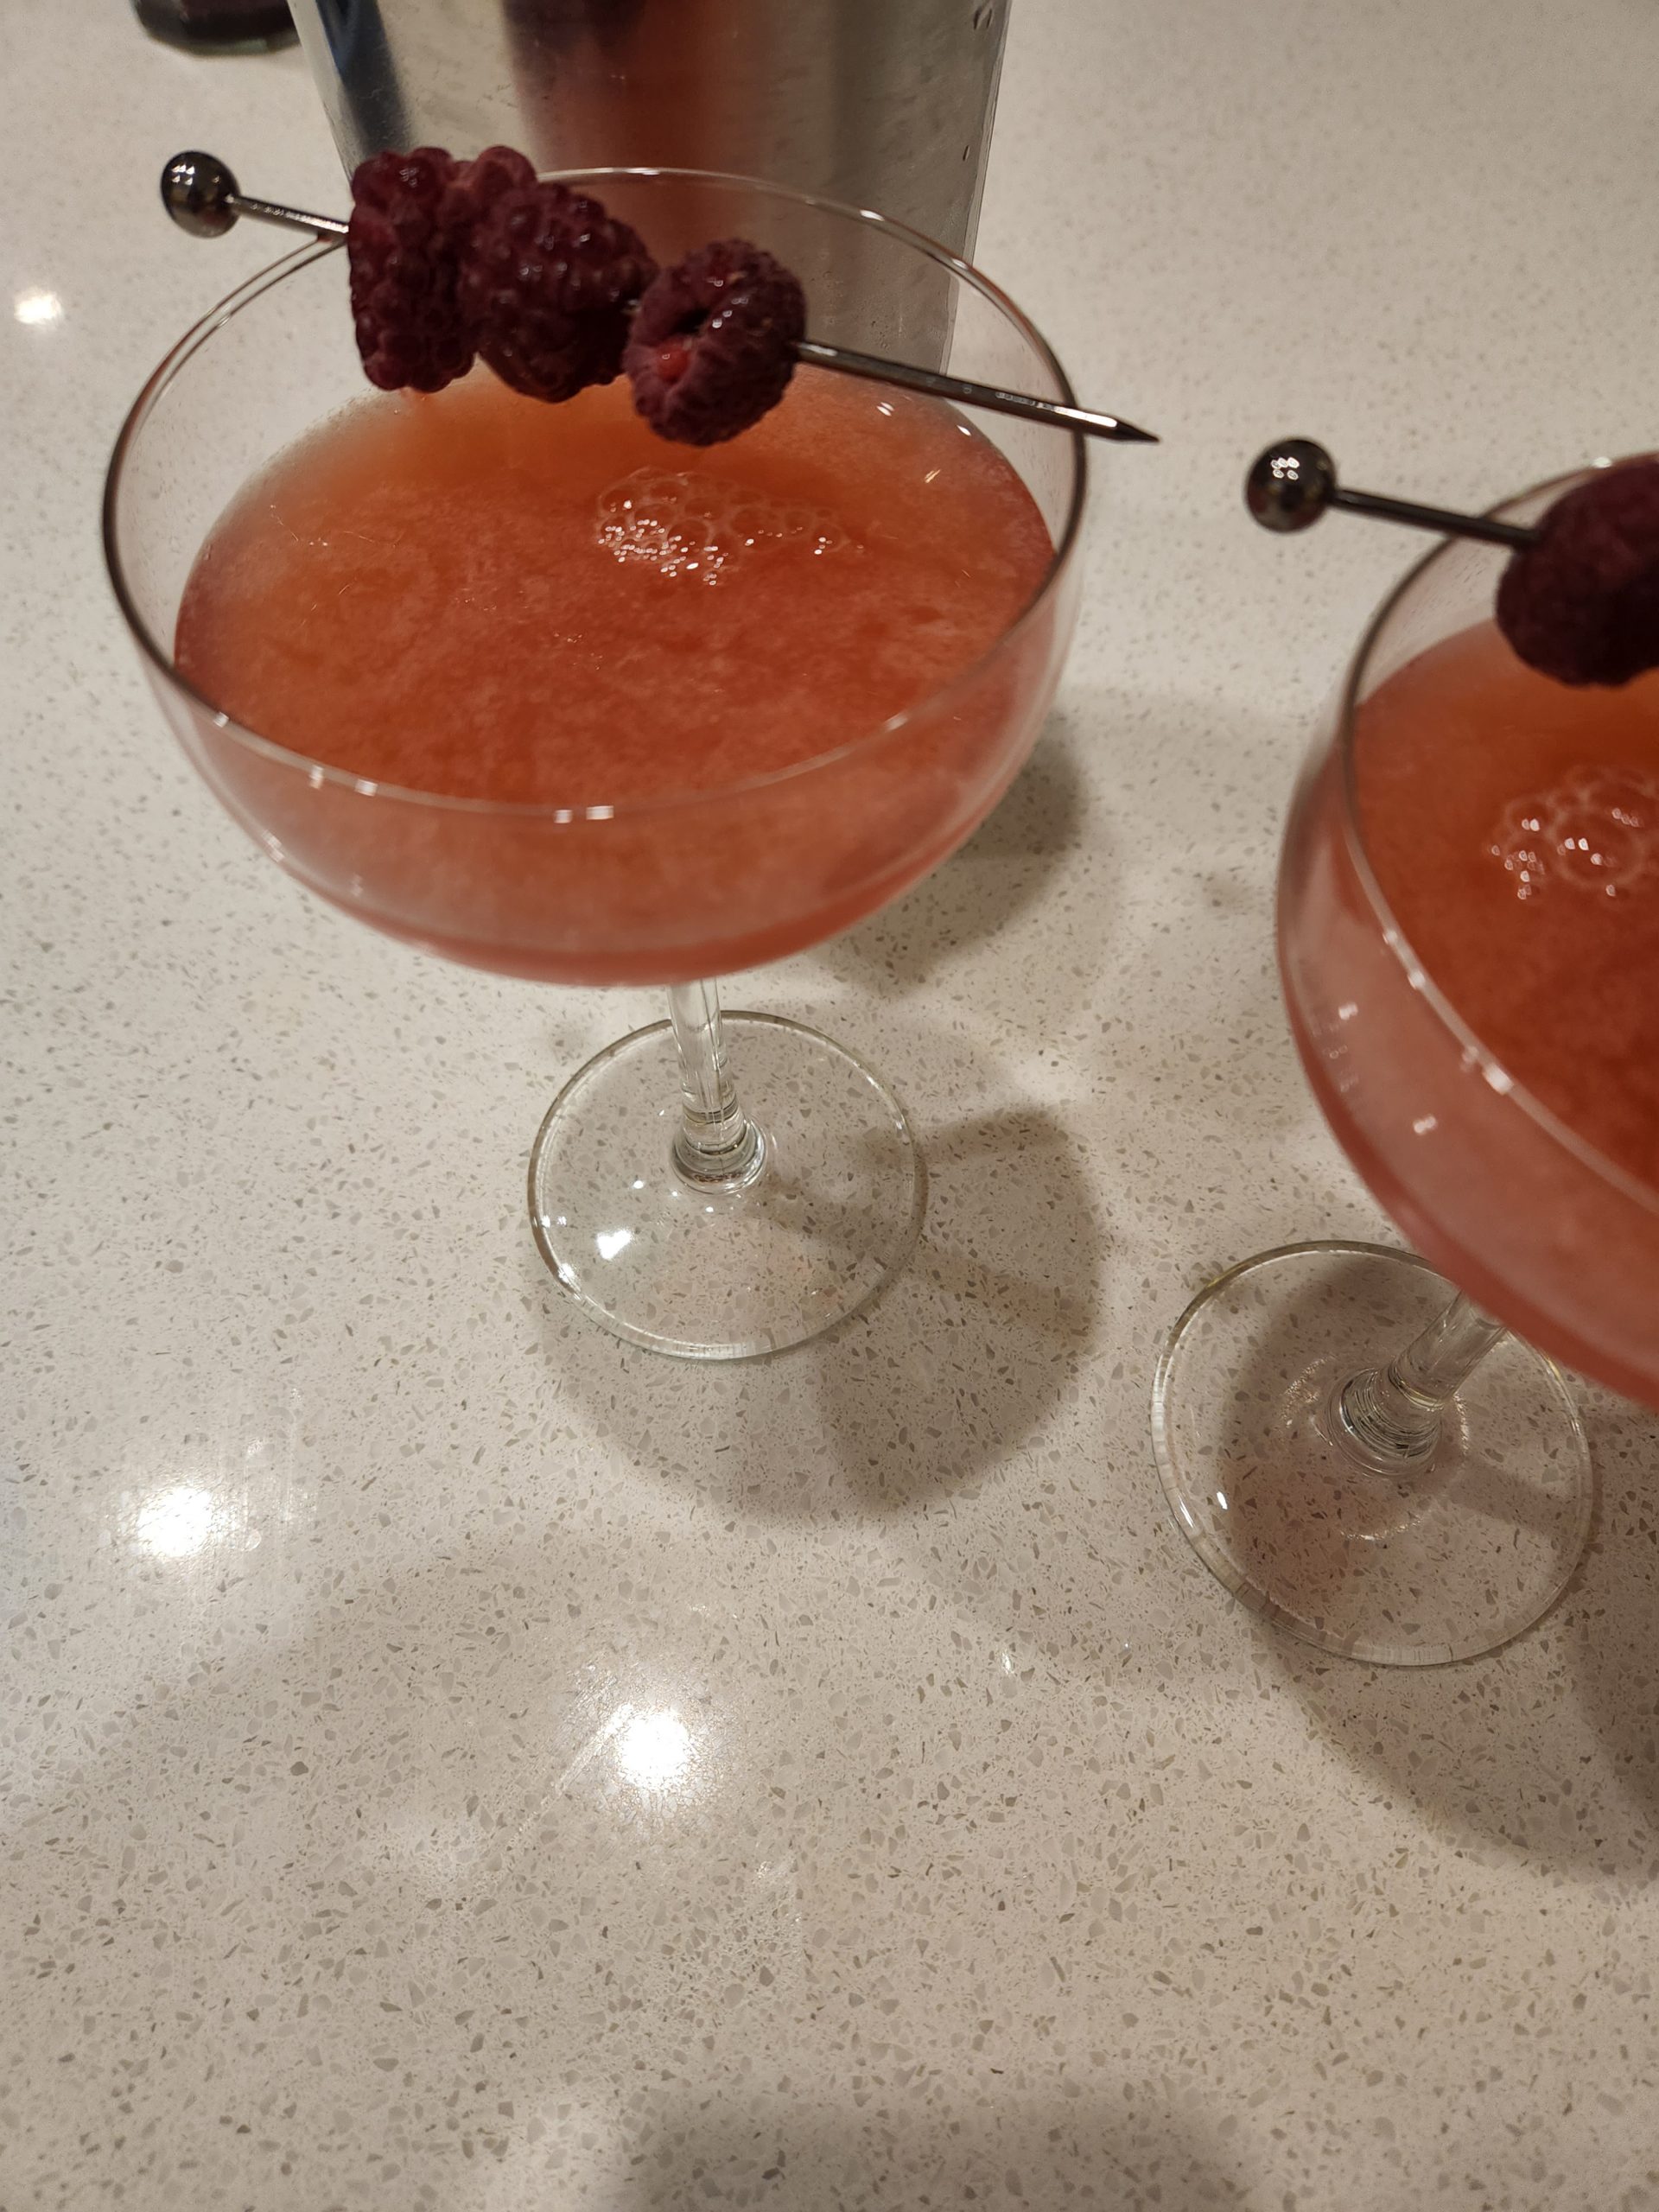 Blinker Recipe - What Cocktail Can I Make?